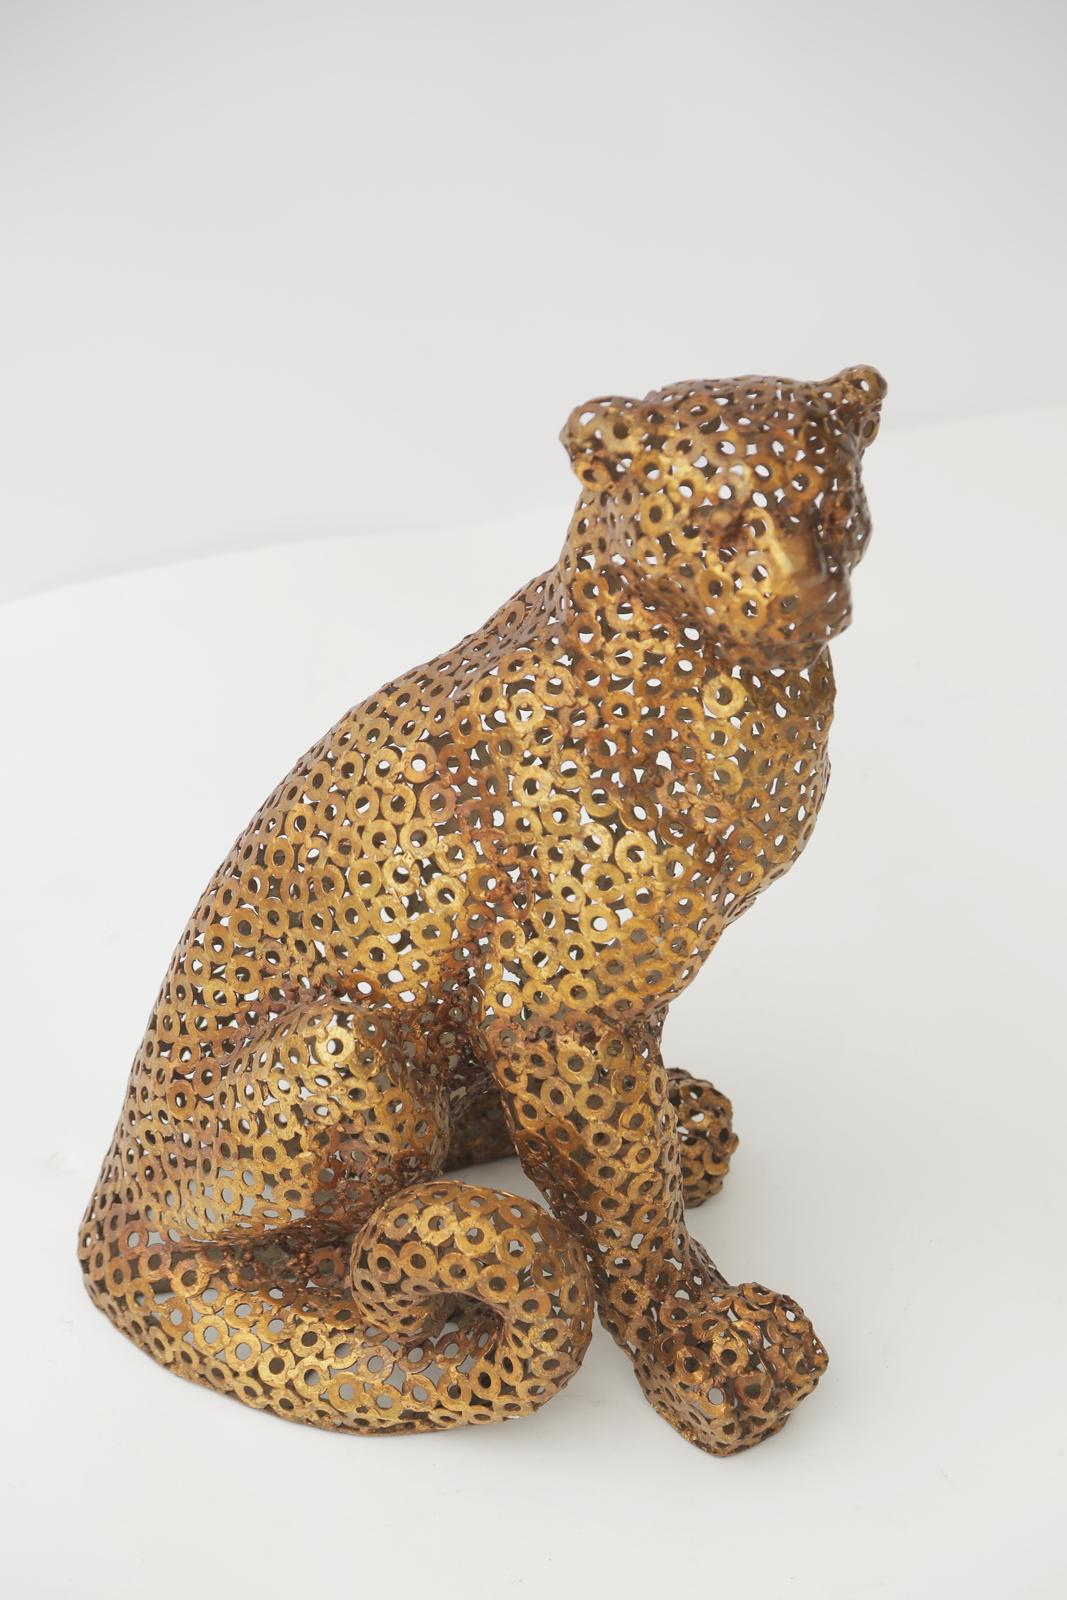 Very unusual sculpture of a leopard, painstakingly formed by welding stock steel washers into its exquisite seated pose, having a gilded finish. 

Stock ID: D3177.